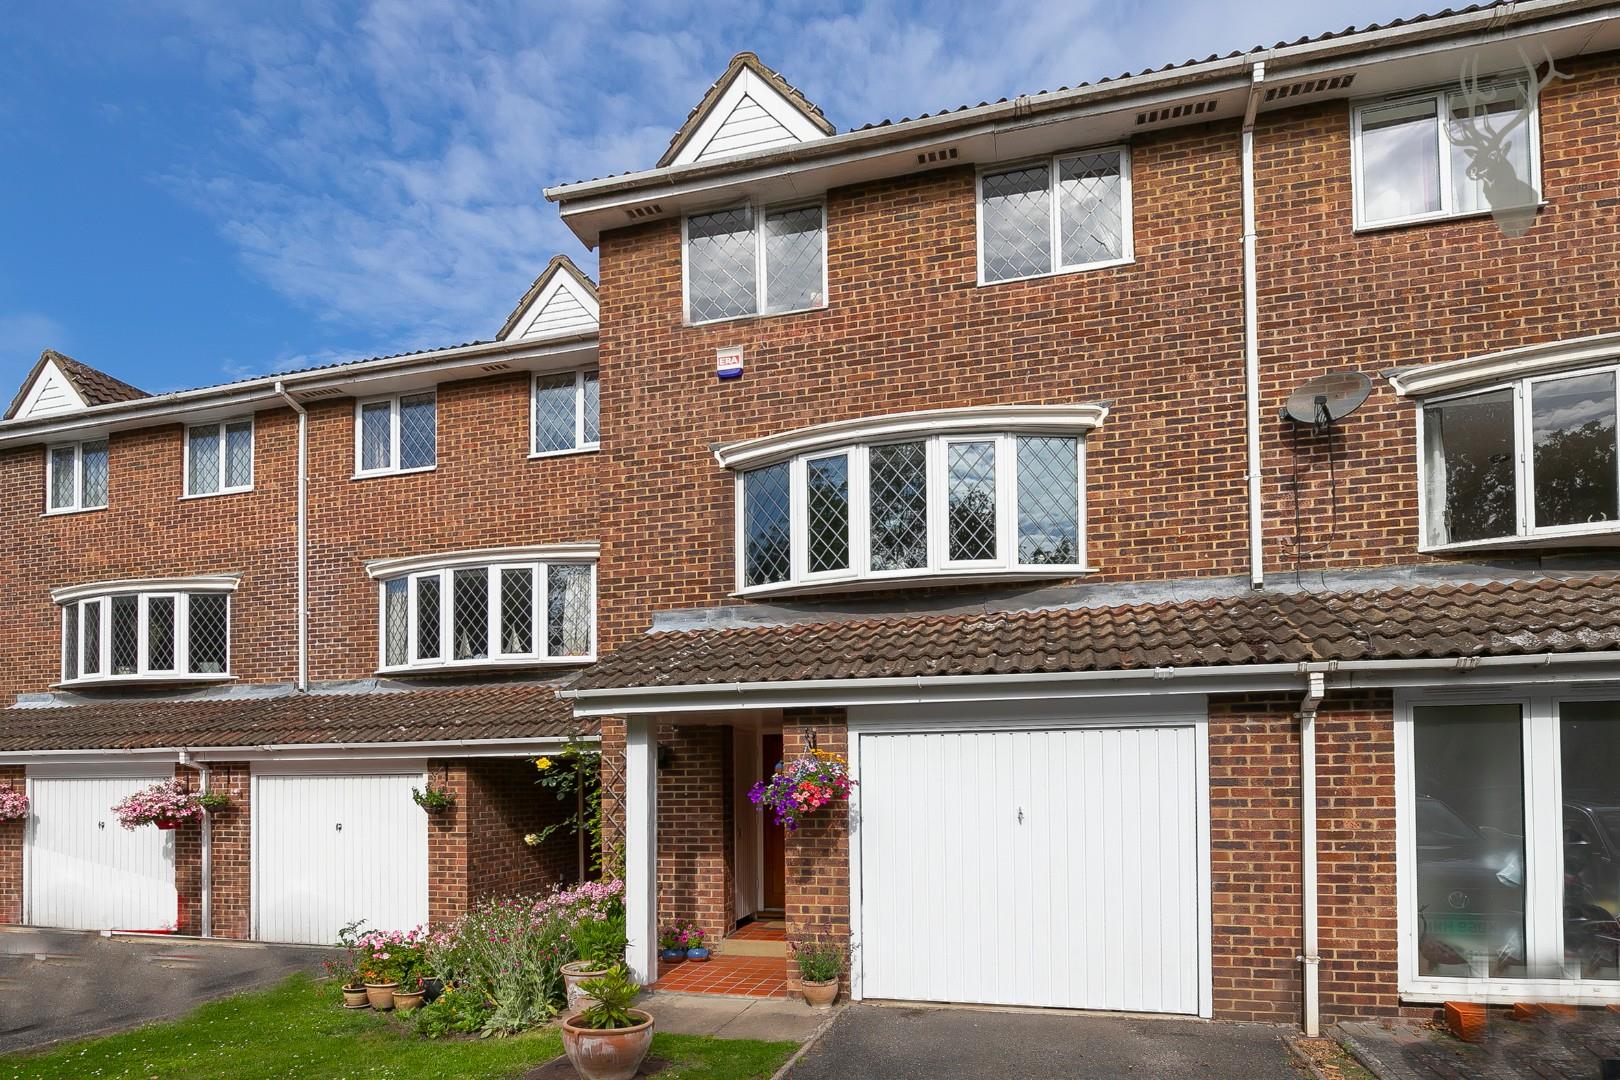 Similar Property: House - Terraced in Theydon Bois